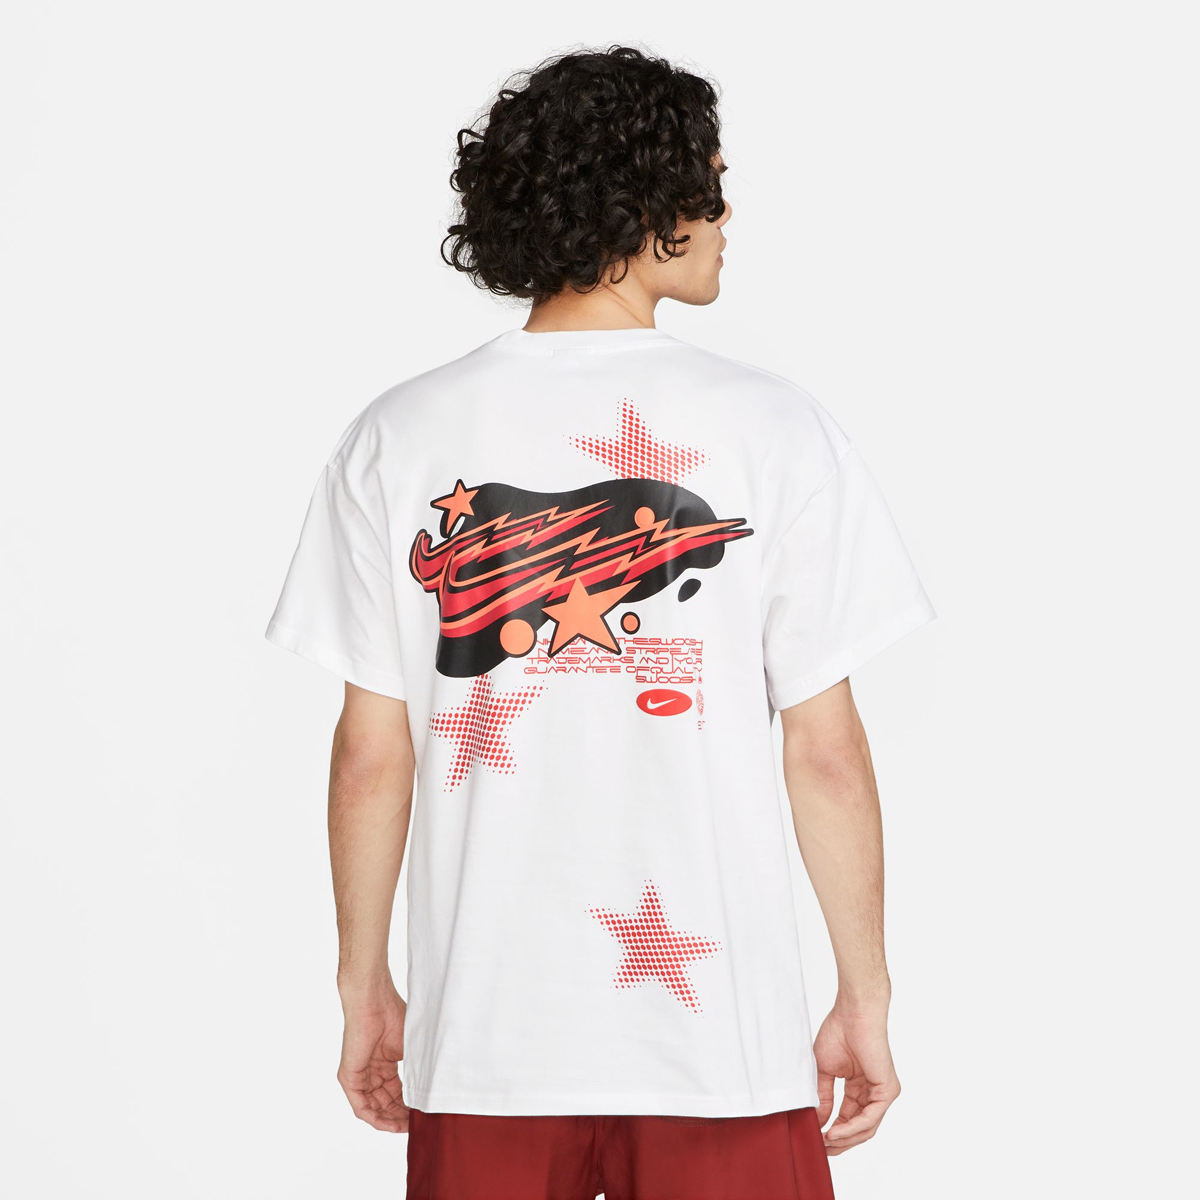 Nike-Electric-High-T-Shirt-White-Red-2